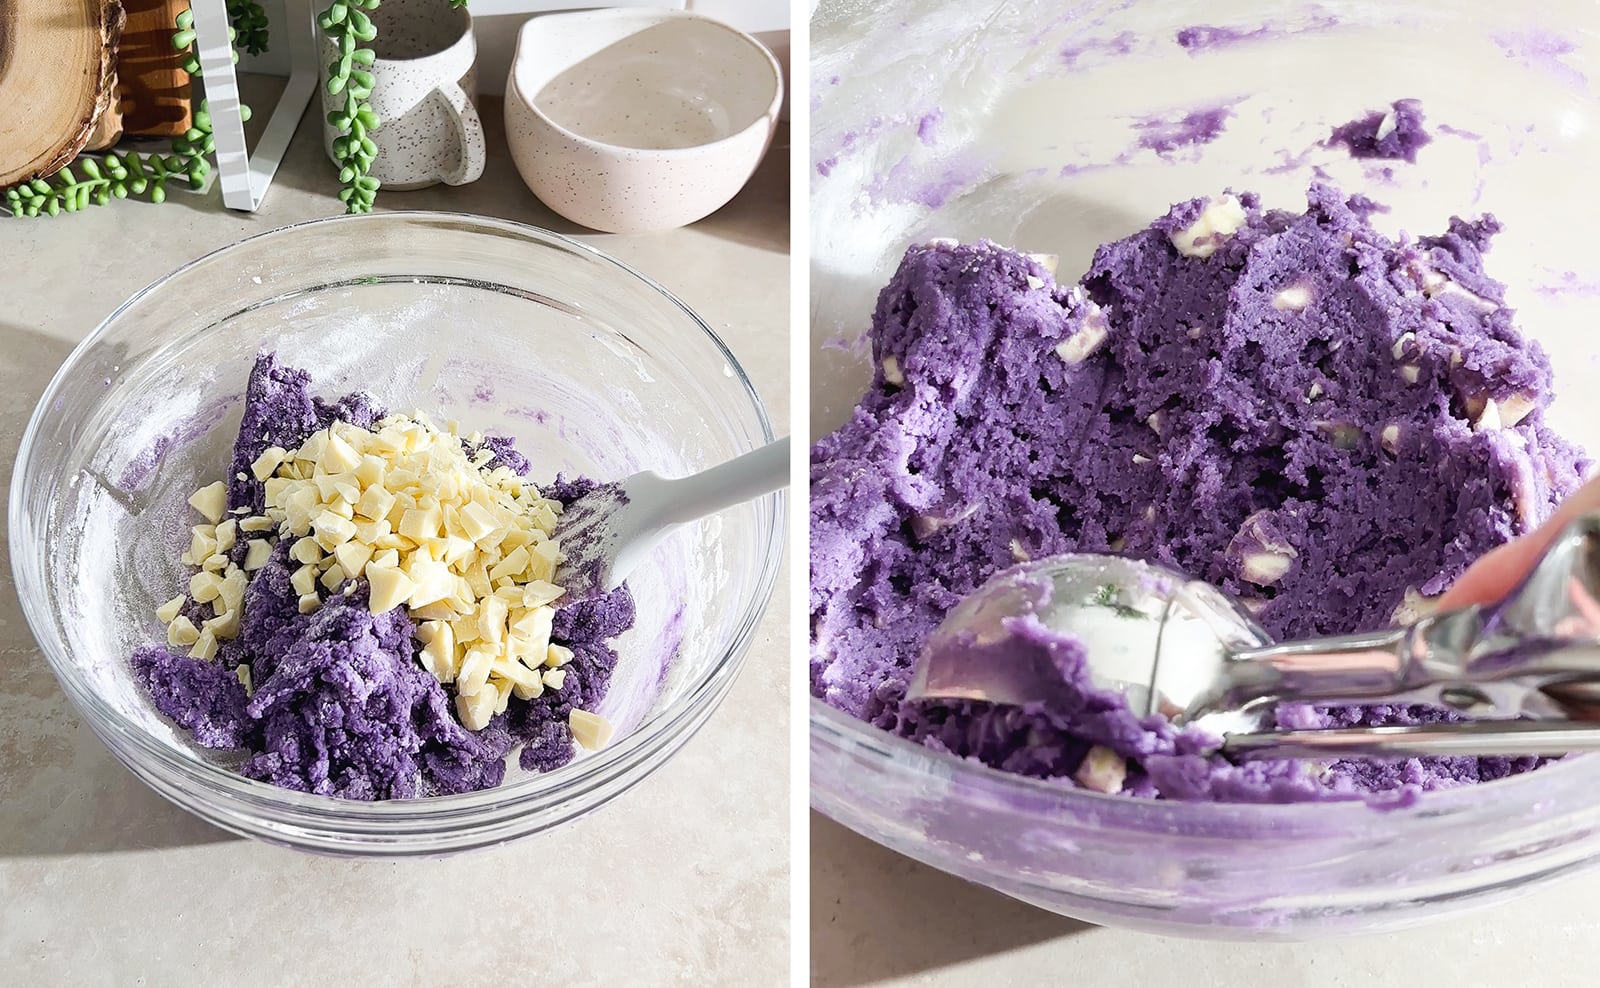 Left to right: white chocolate chunks in bowl of purple cookie batter, scooping cookie batter with ice cream scooper.